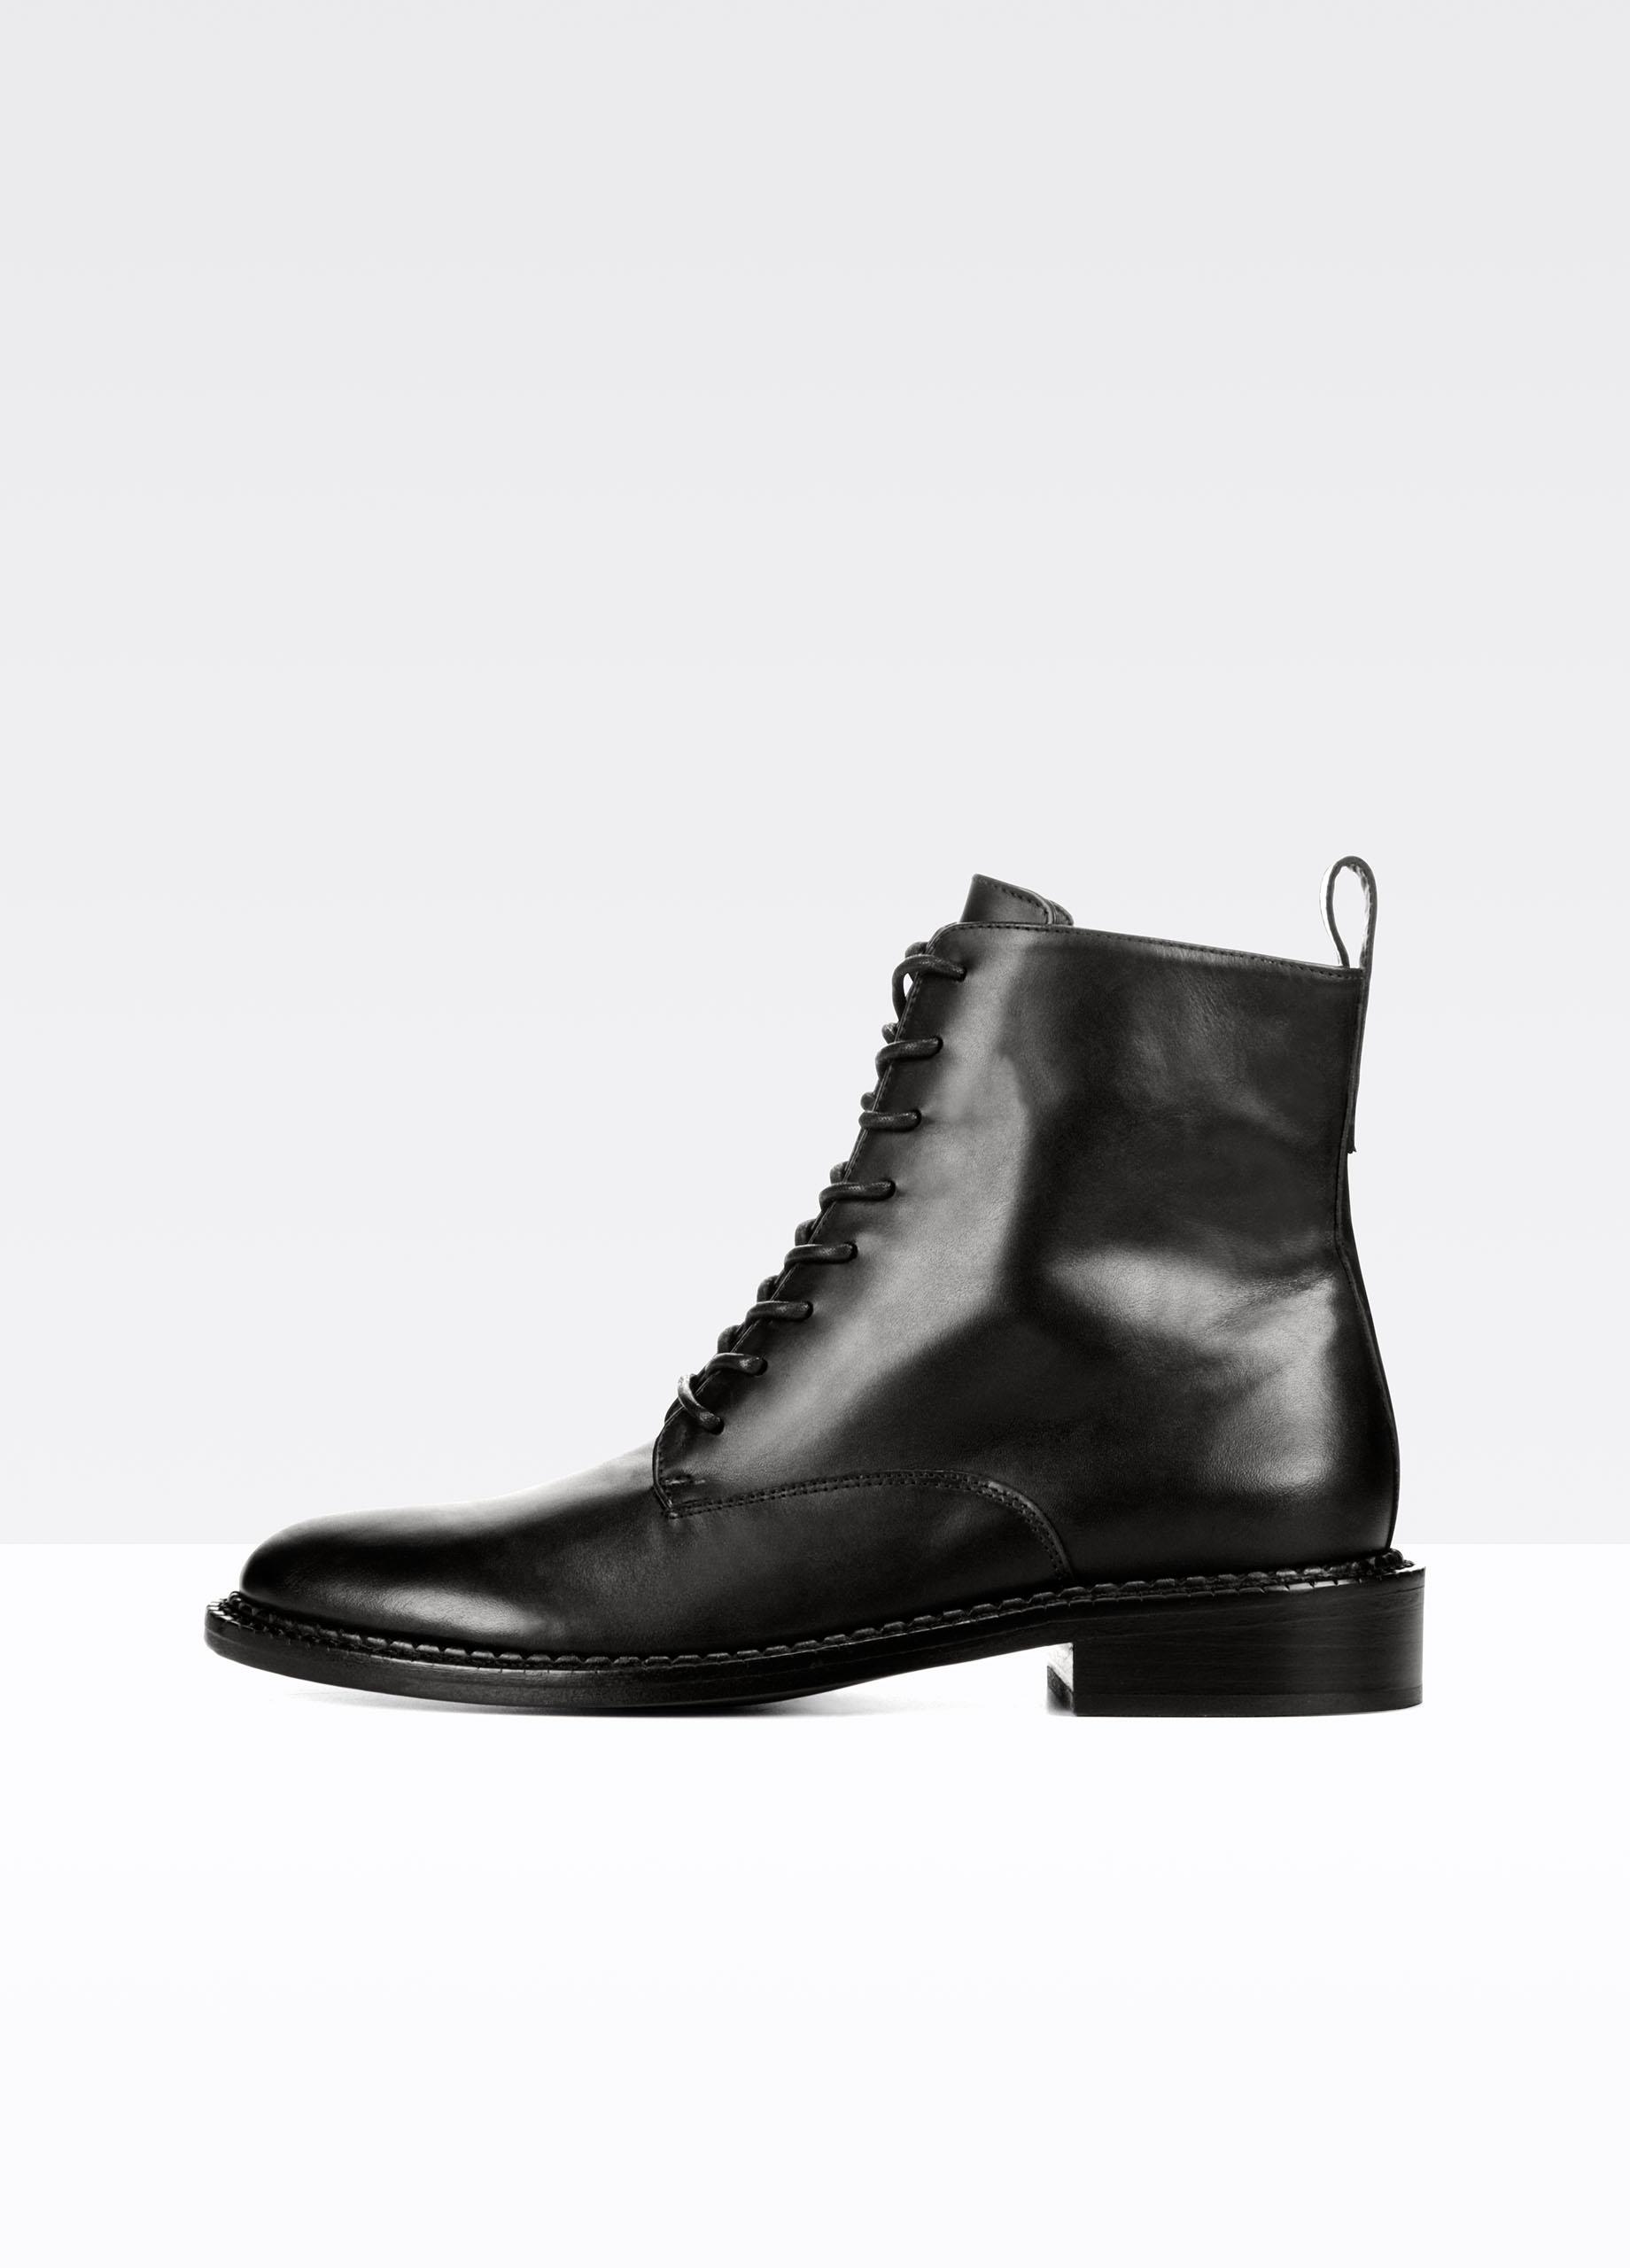 Vince Leather Cabria Booties in Black 